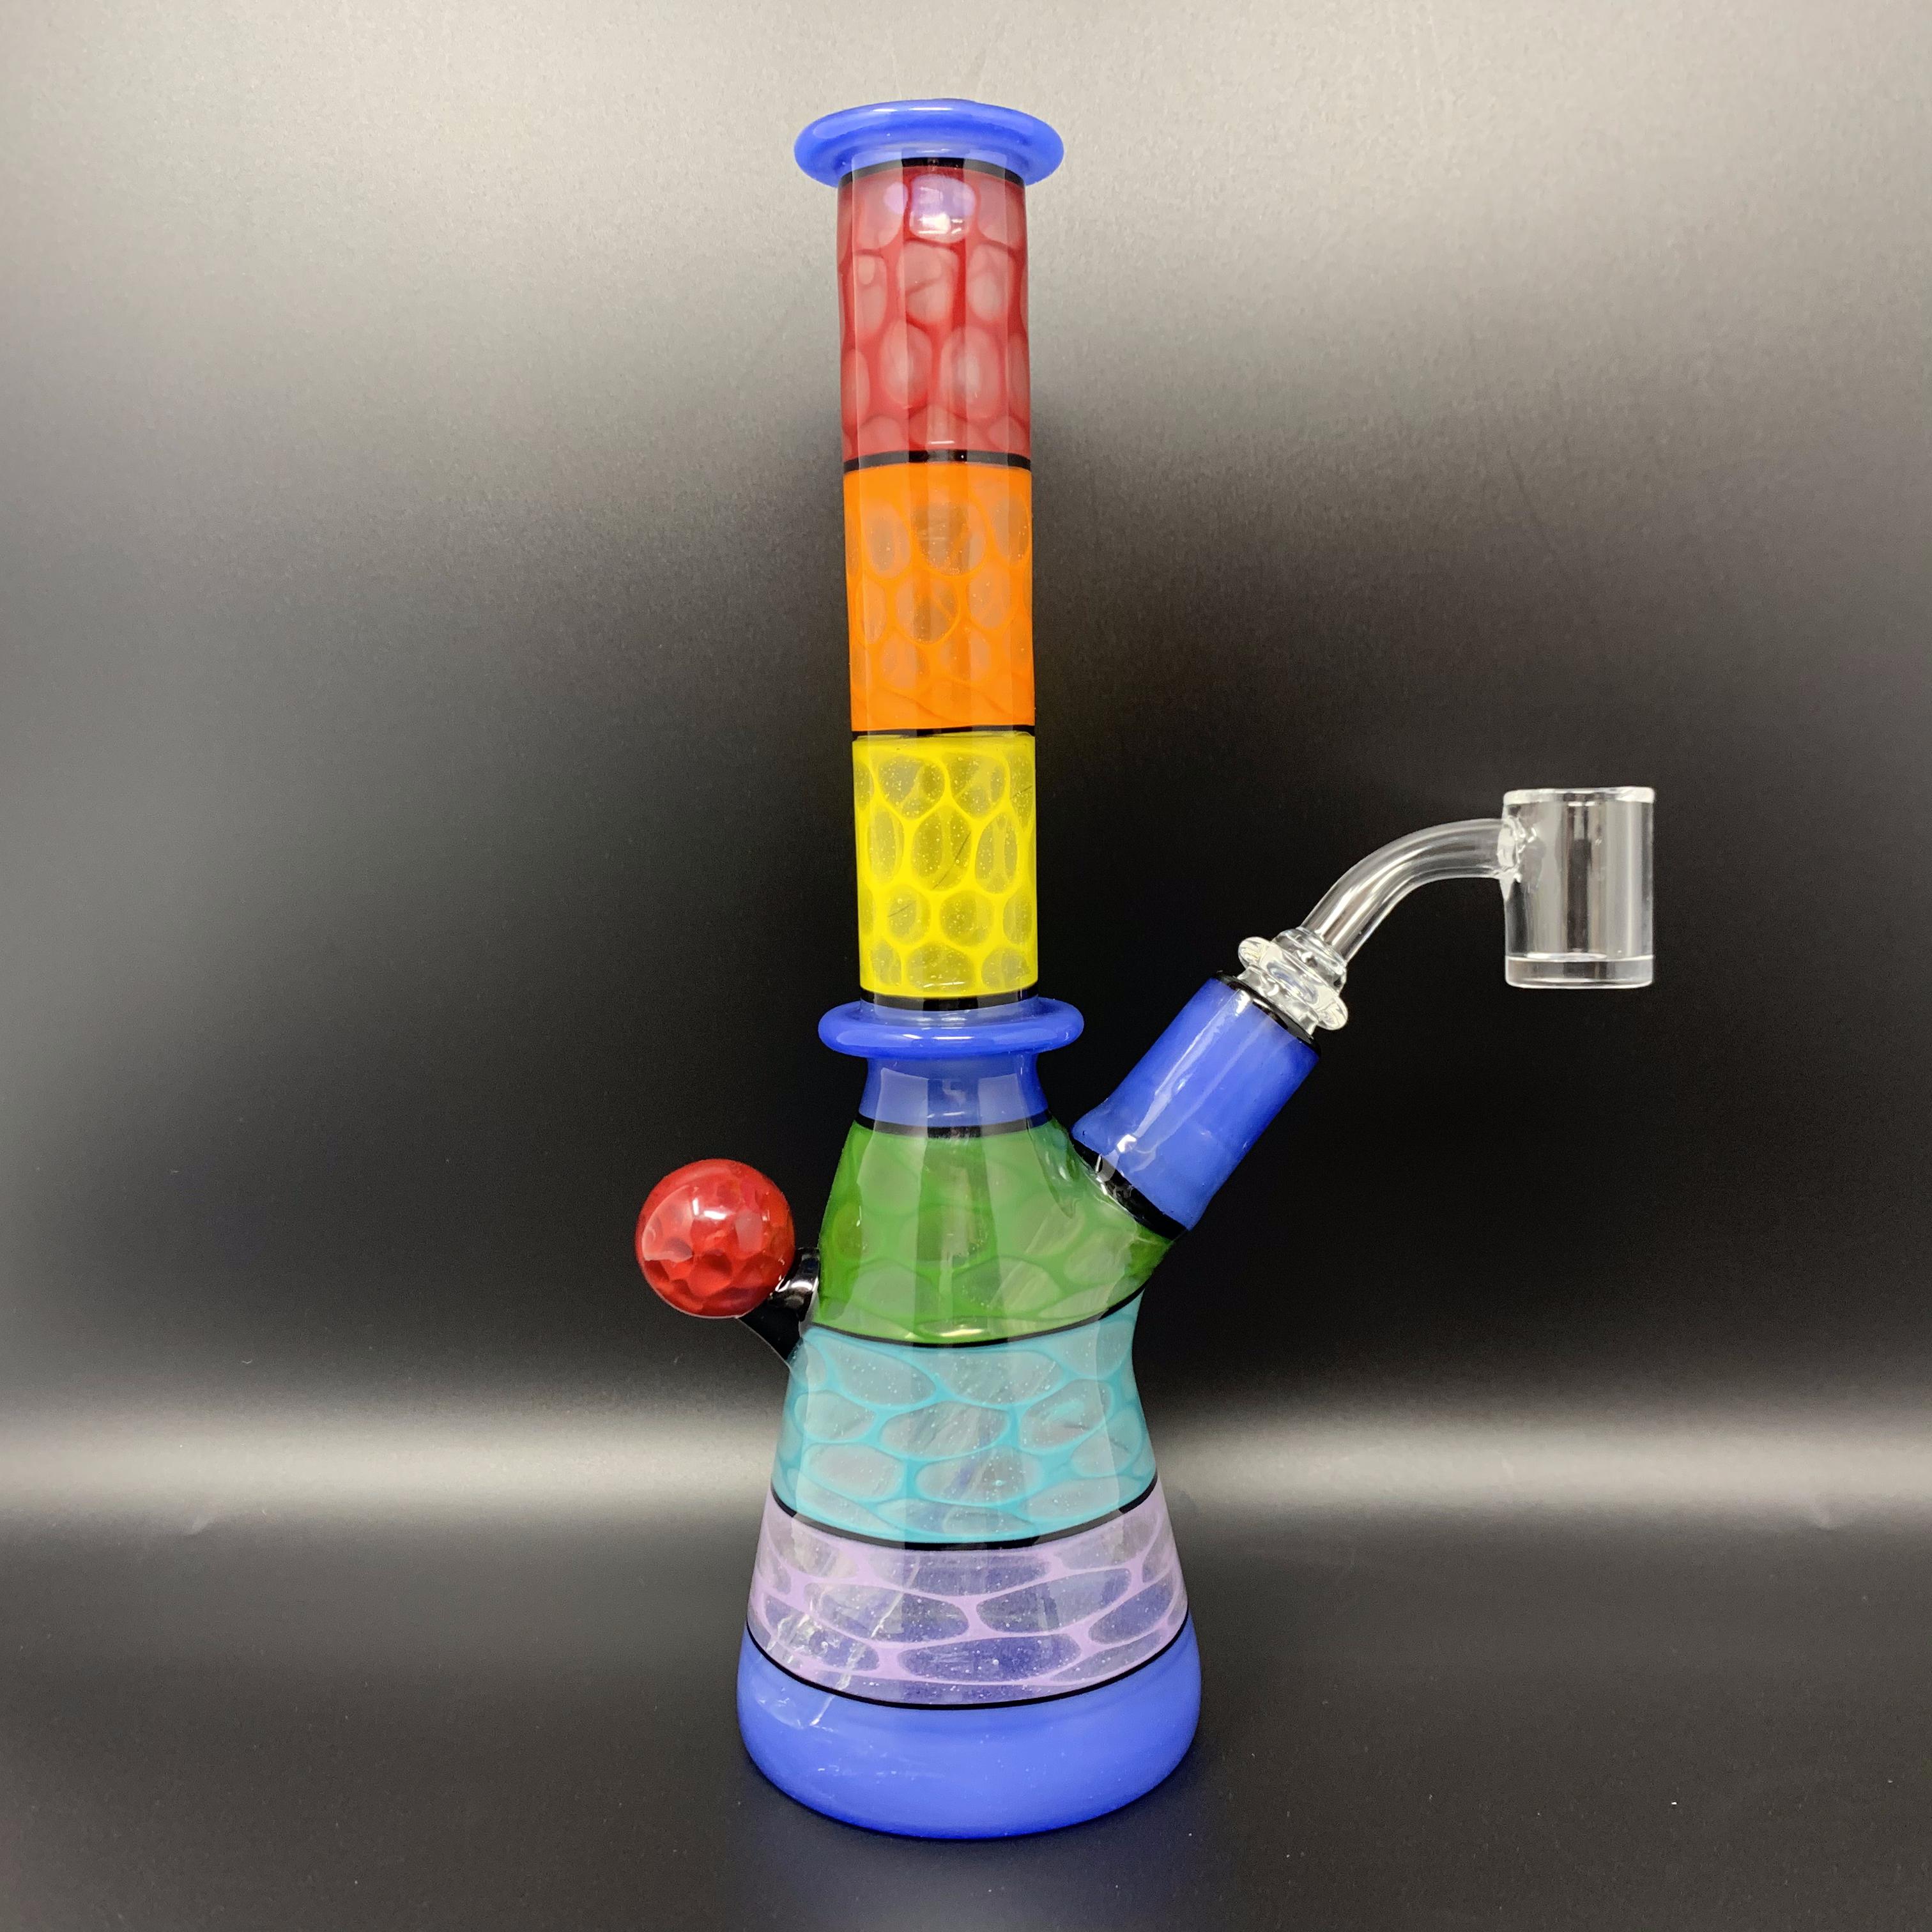 Heady Glass or Imported Glass? What is Heady Glass?